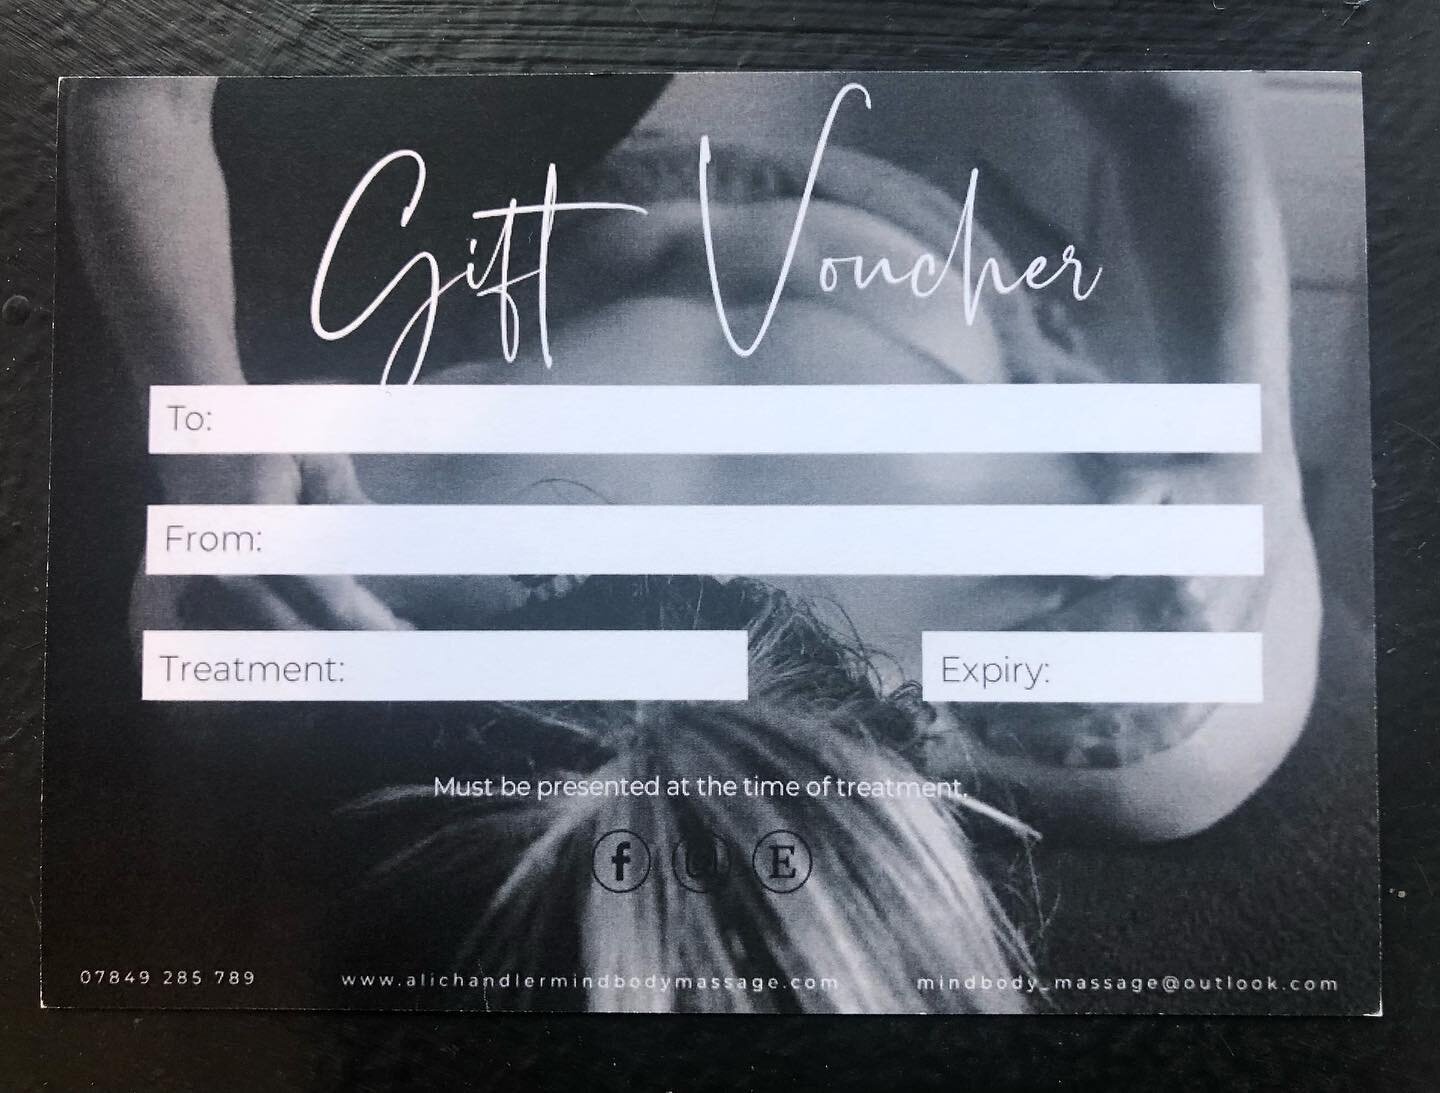 The gift of massage&hellip; could there be anything better?! 😍

The festive season is nearing, and gift vouchers are always a great gift for loved ones ✨

Relax, rejuvenate &amp; pamper your favourite people 🥰

Available by post or email 📫 📧